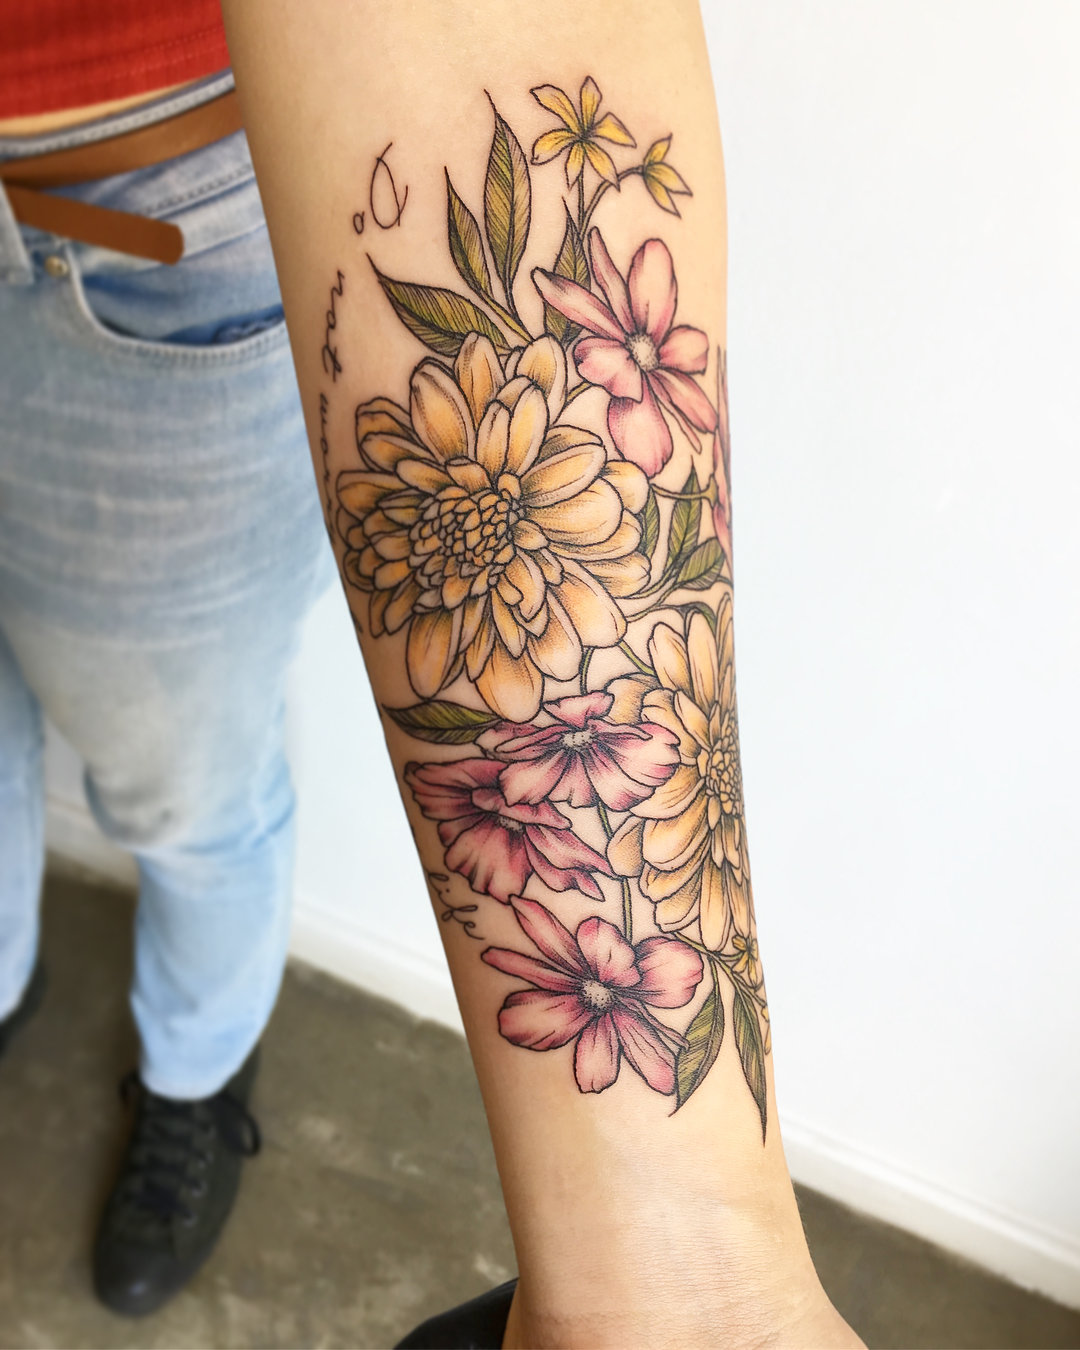 30 Gorgeous Flower Tattoos On Arm For Women You'll Actually Want Forever -  YouTube